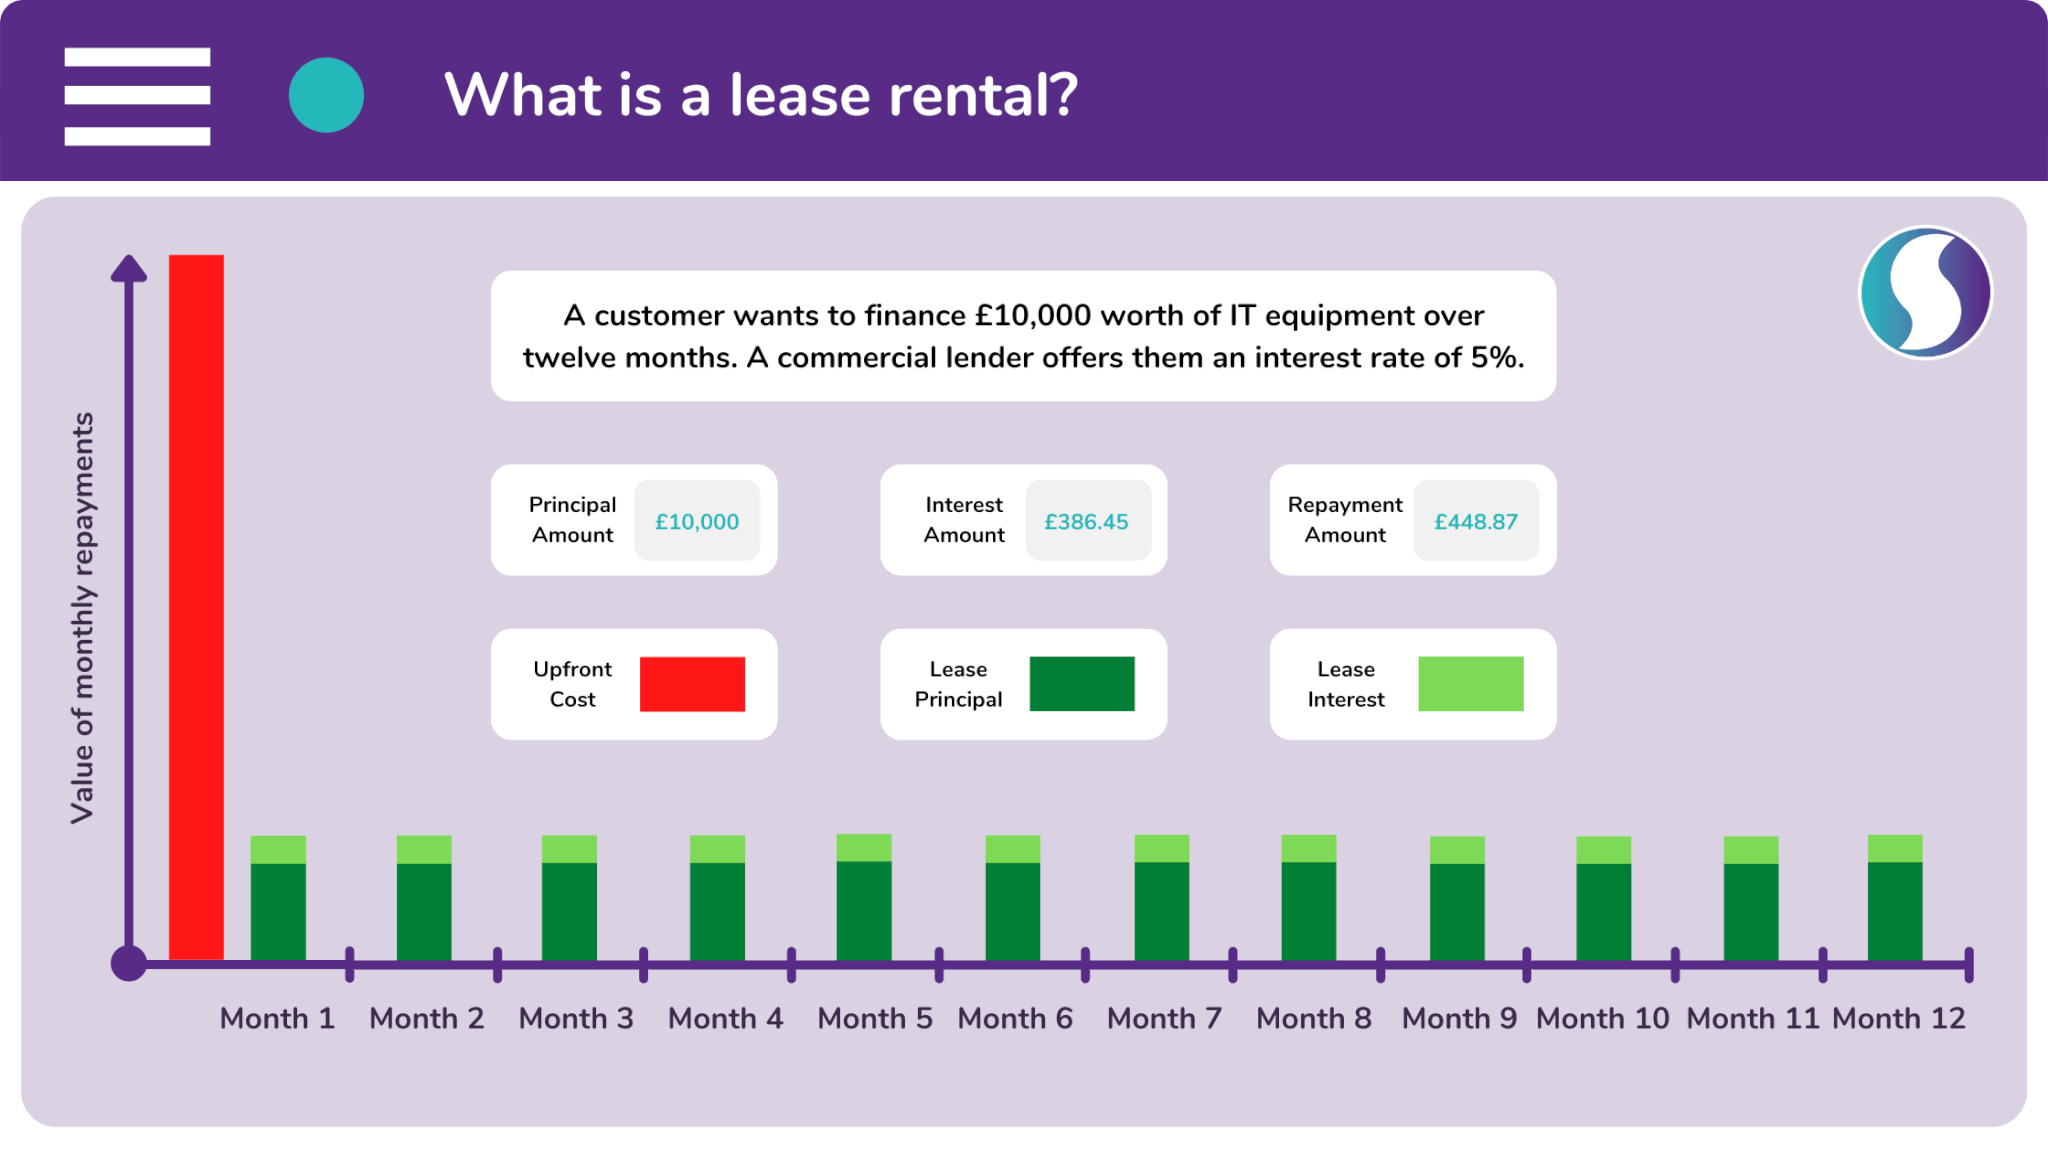 A lease rental is a type of sales enablement finance where the cost is divided into equal installments.